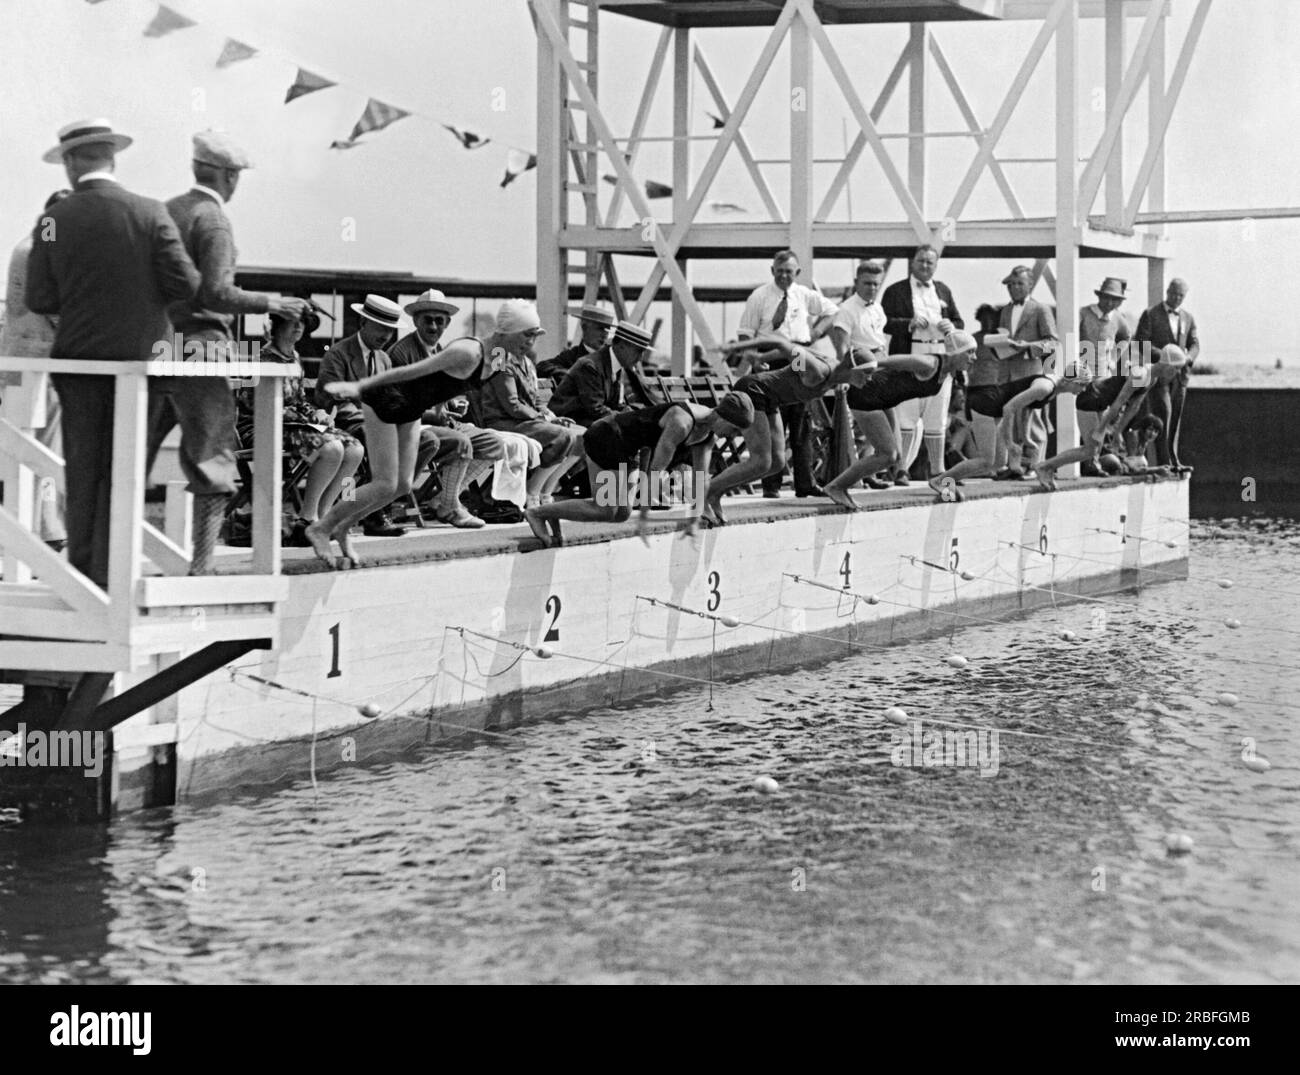 Massapequa, New York:  July 28, 1927 The start of the women's 100 meter freestyle at the National A.A.U. Swimming Championship meet being held at the Biltmore Shore Yacht Club on Long Island. The event was won by Martha Norelius, and in second place was Adelaide Lambert. Stock Photo